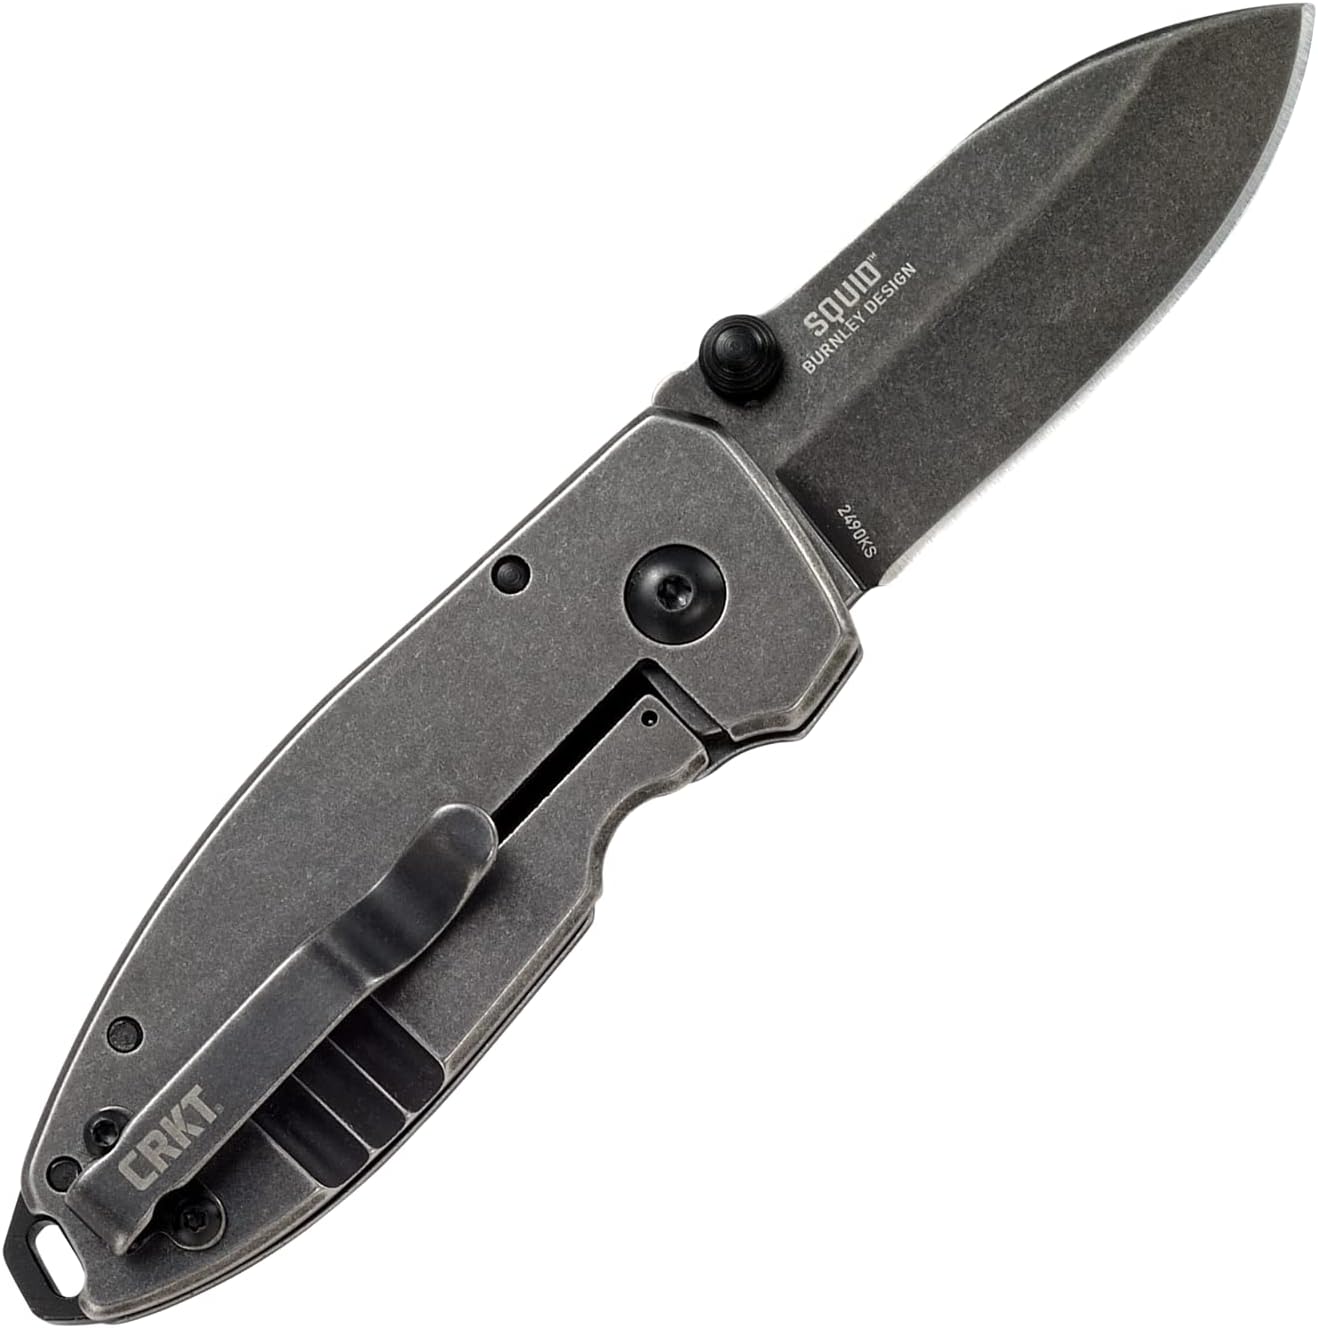 CRKT, Squid Folding Pocket Knife: Compact EDC Straight Edge Utility Knife with Stainless Steel Blade and Framelock Handle